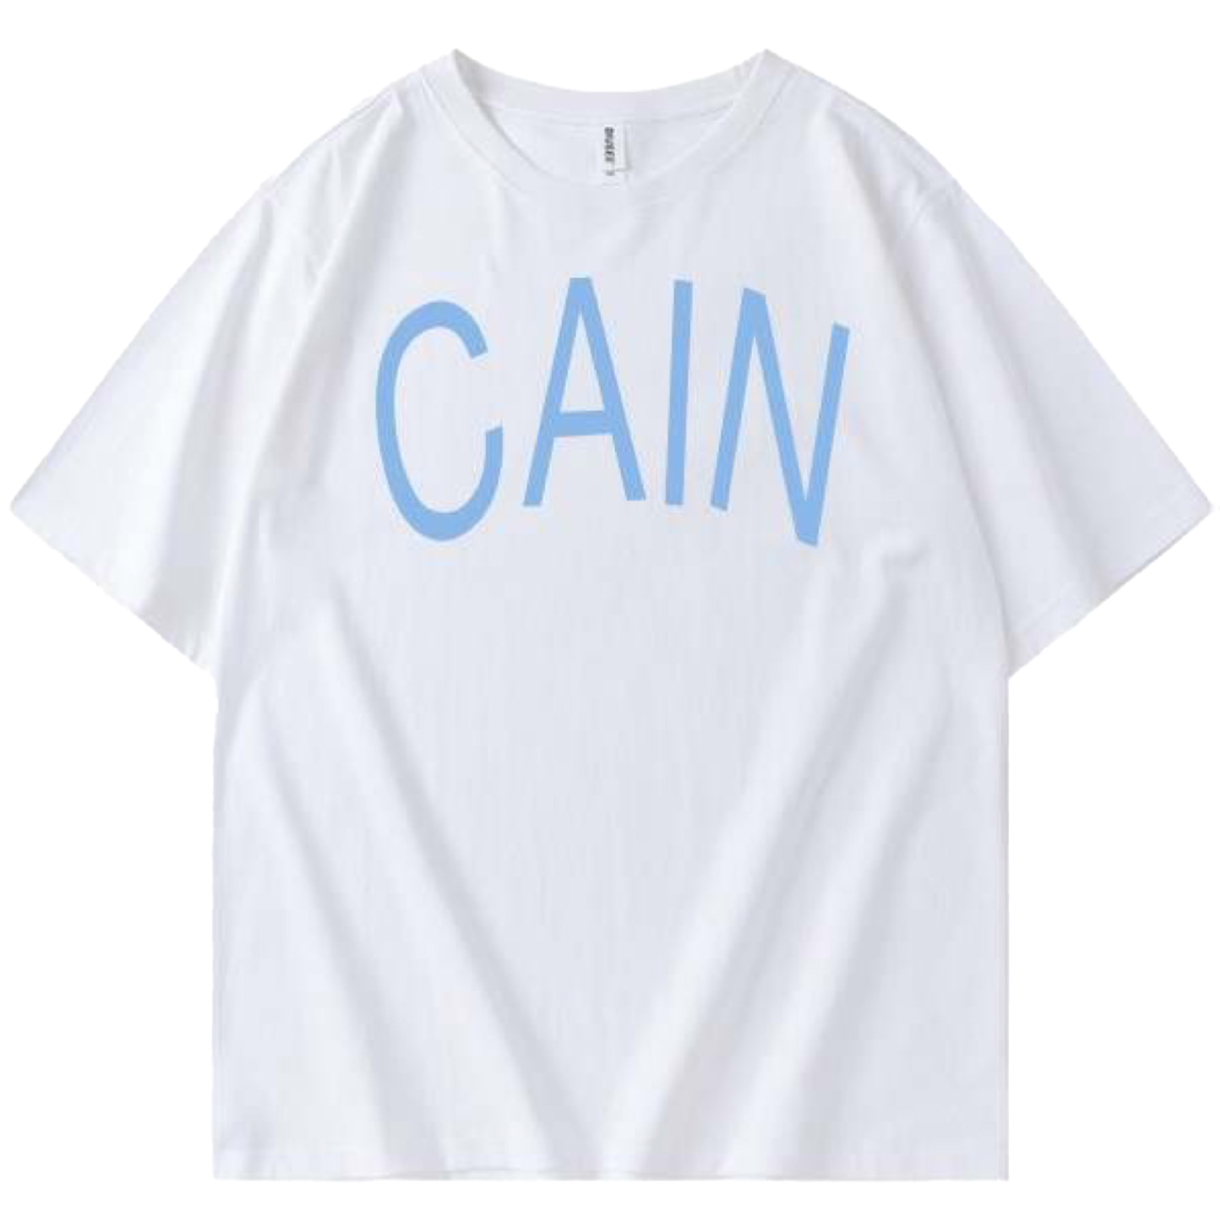 “arch” tee by CAIN